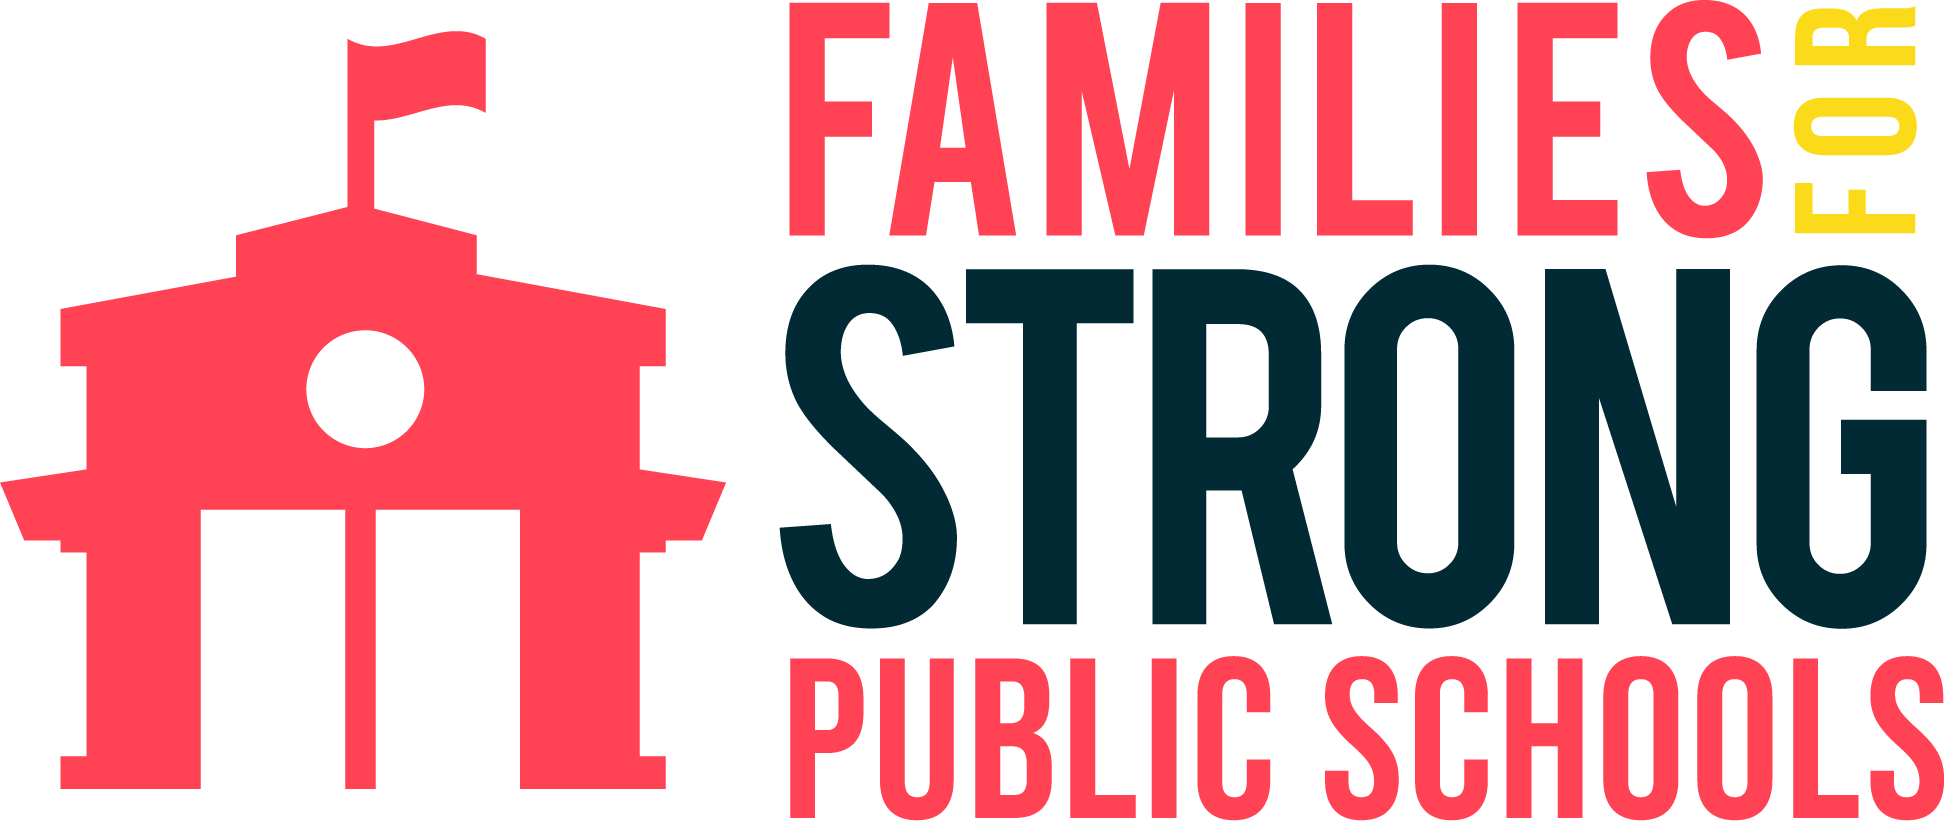 Families for Strong Public Schools